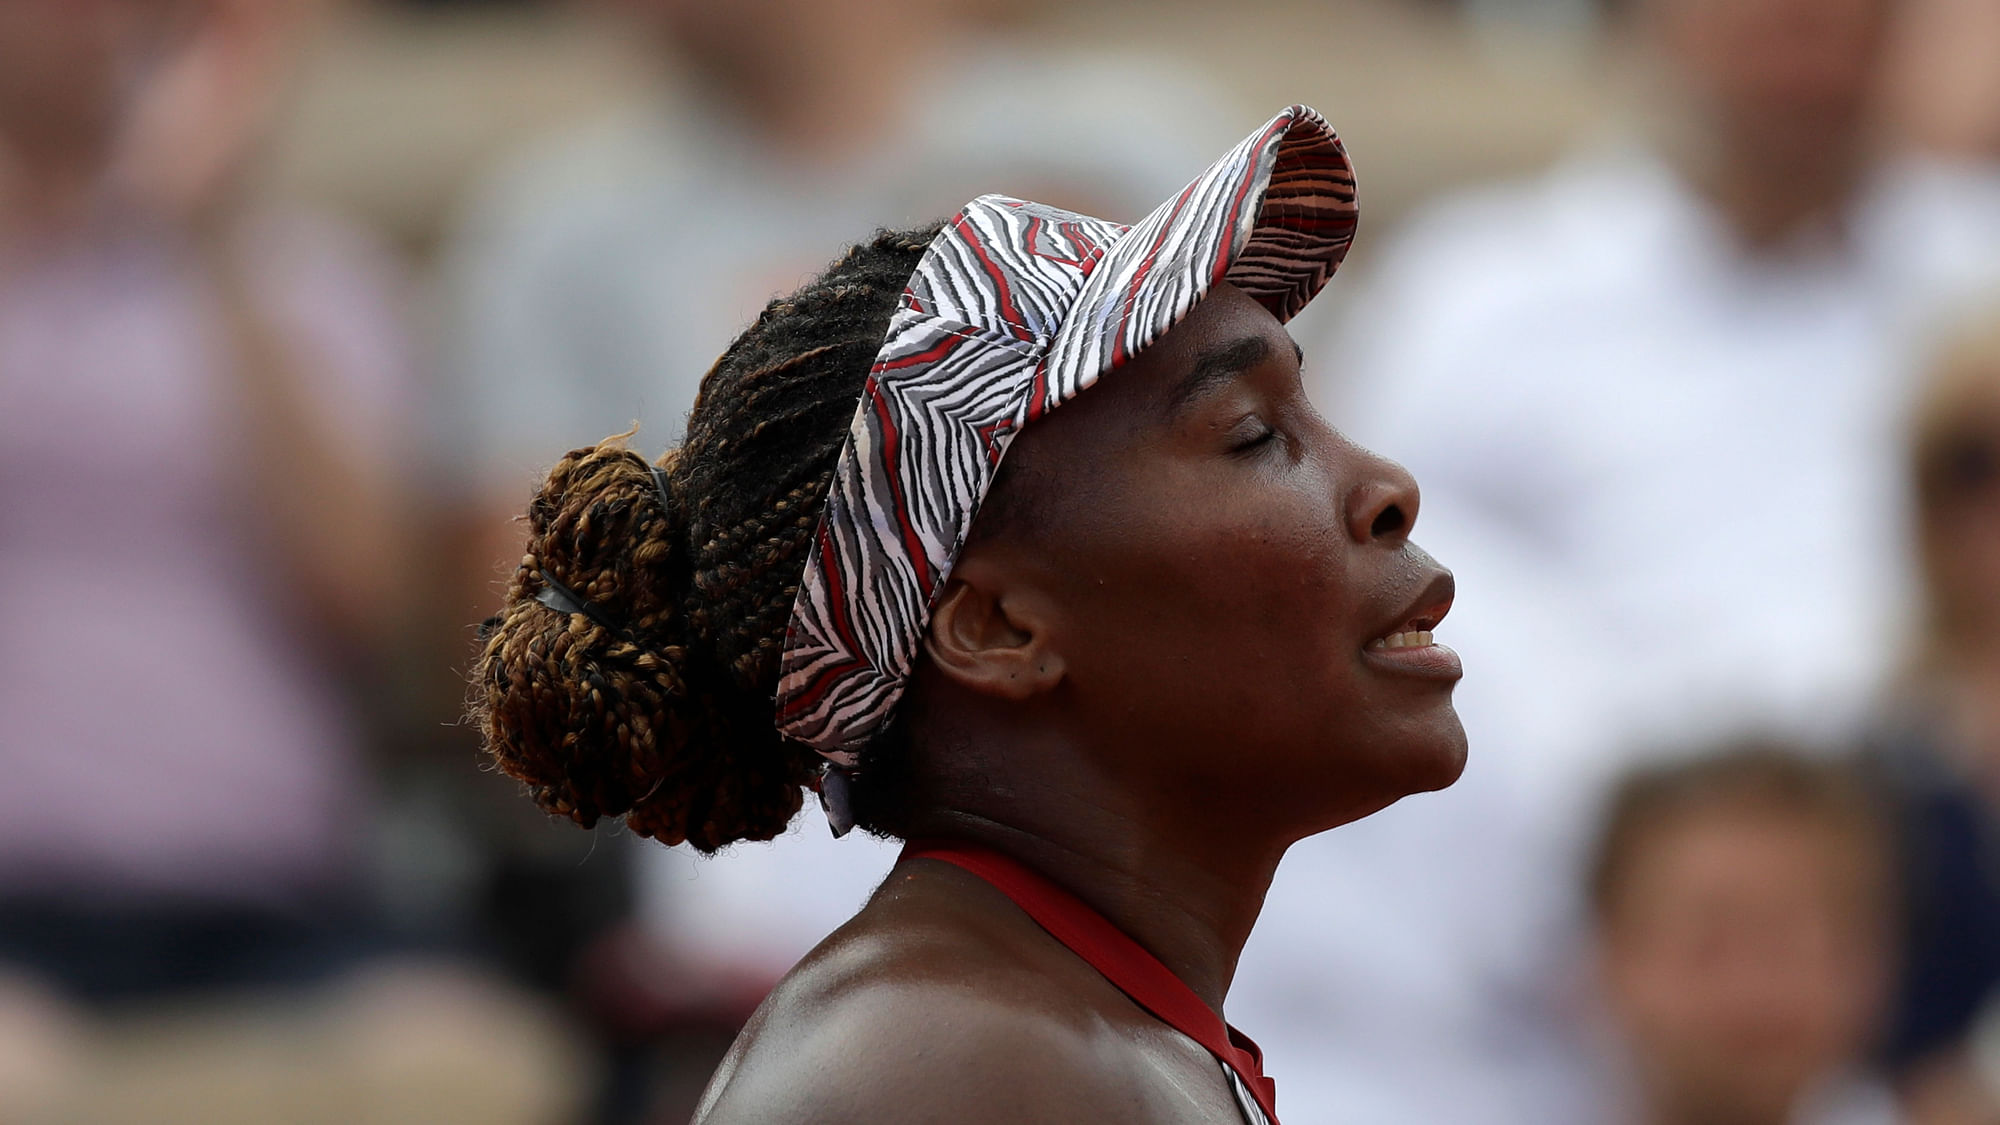 Venus Williams closes her eyes after losing to China’s Qiang Wang during their first round match of the French Open tennis tournament at the Roland Garros Stadium.